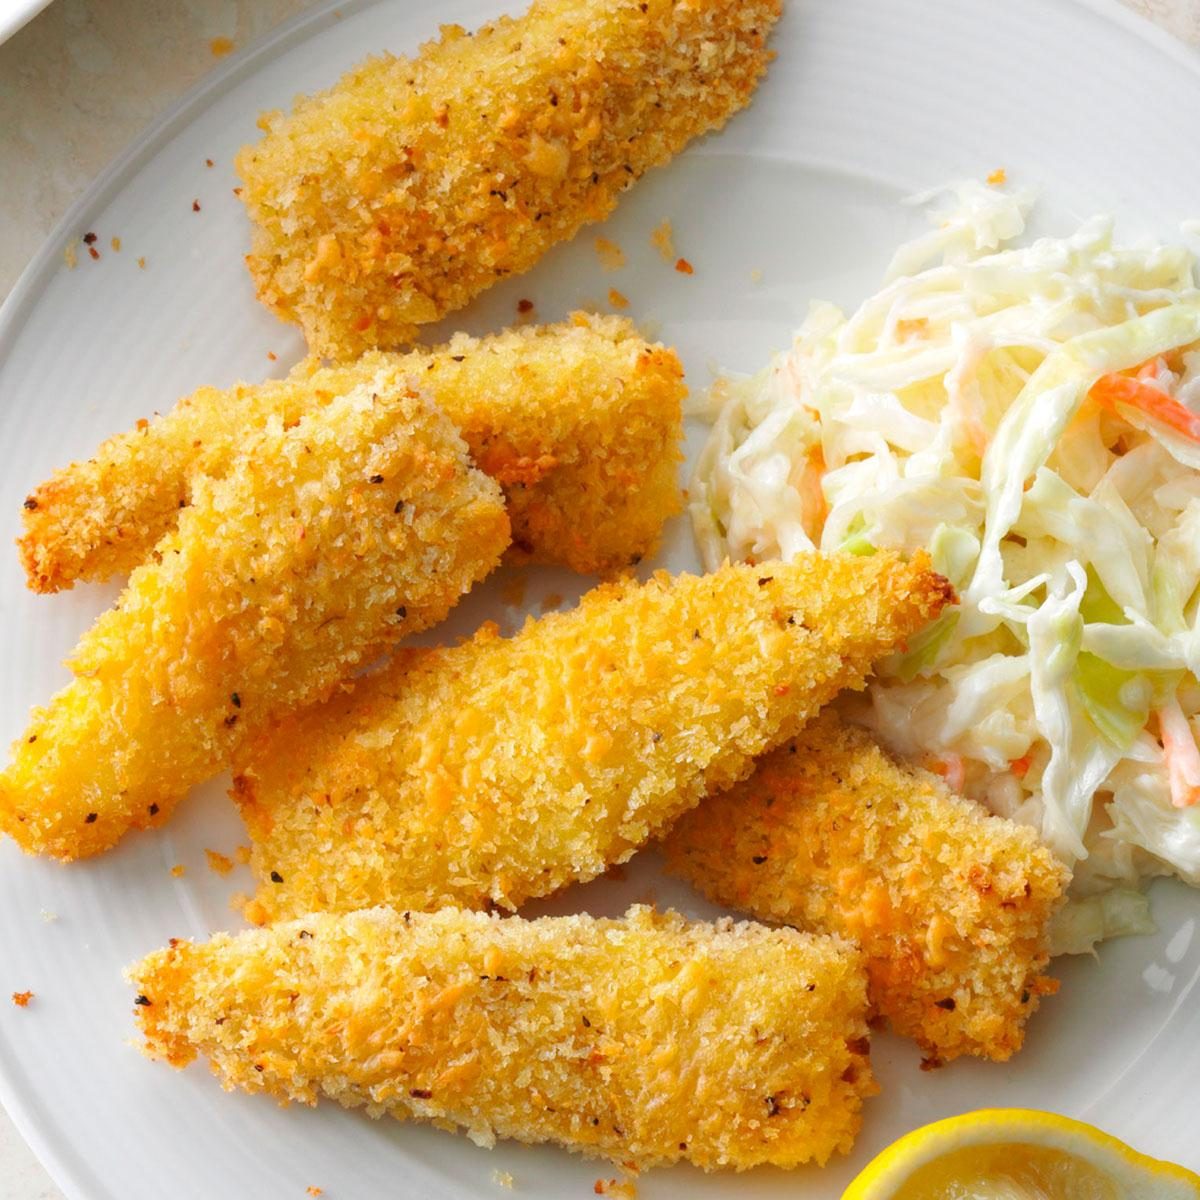 <p>I wanted a healthier approach to fish sticks and developed a baked tilapia with a slightly peppery bite. My husband and sons love the crispy coating. —Candy Summerhill, Alexander, Arkansas</p> <div class="listicle-page__buttons"> <div class="listicle-page__cta-button"><a href='https://www.tasteofhome.com/recipes/parmesan-fish-sticks/'>Go to Recipe</a></div> </div>